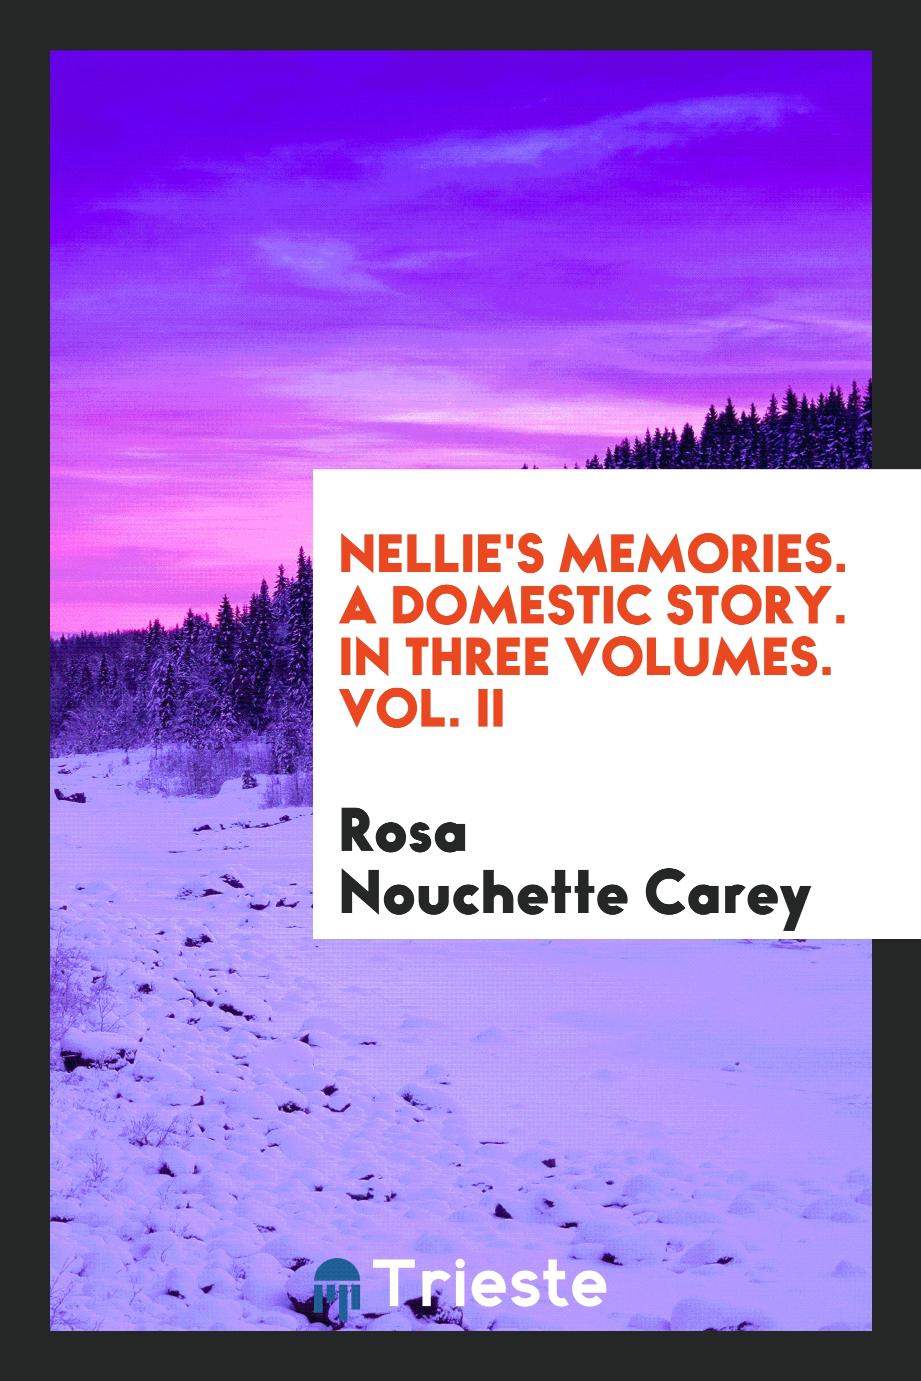 Nellie's Memories. A Domestic Story. In Three Volumes. Vol. II